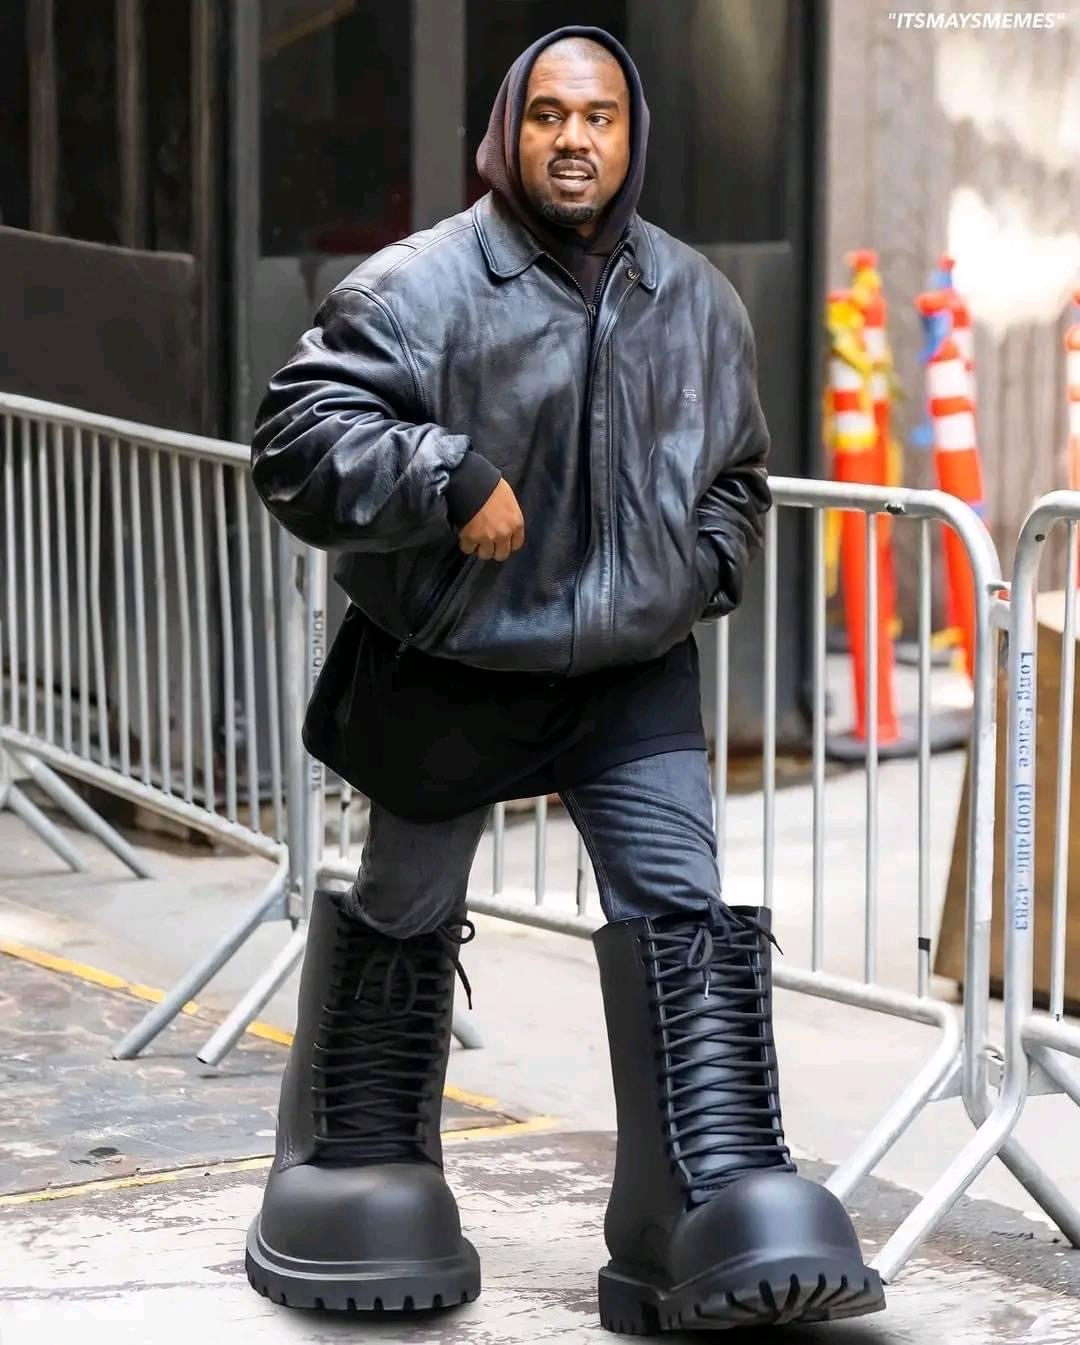 High Quality Yeezy Boots Blank Meme Template